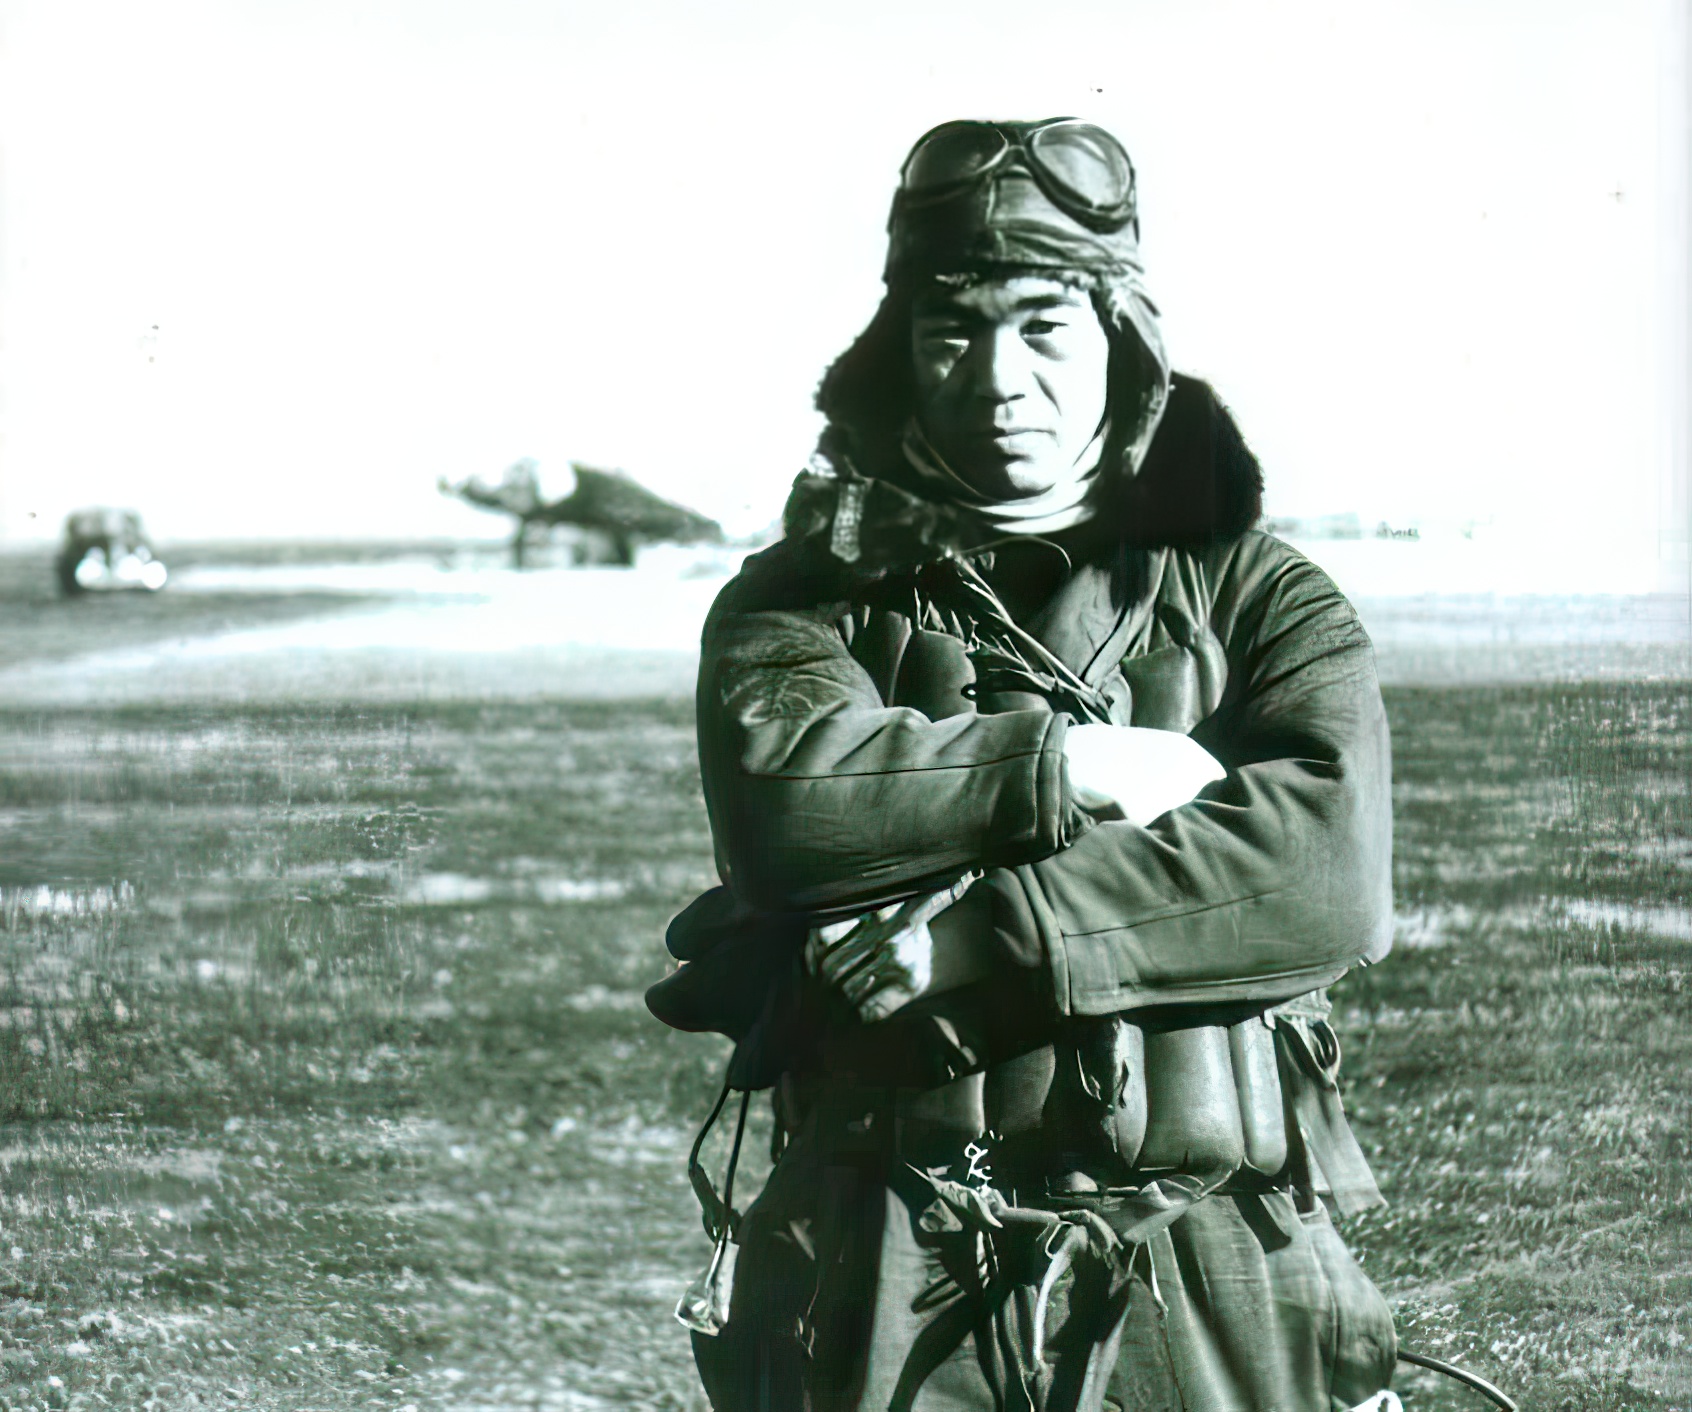 Japanese fighter ace Saburo Sakai (1916-2000) as a Petty Officer-pilot wears a flight suit at Hankow Airfield in Wuhan, China